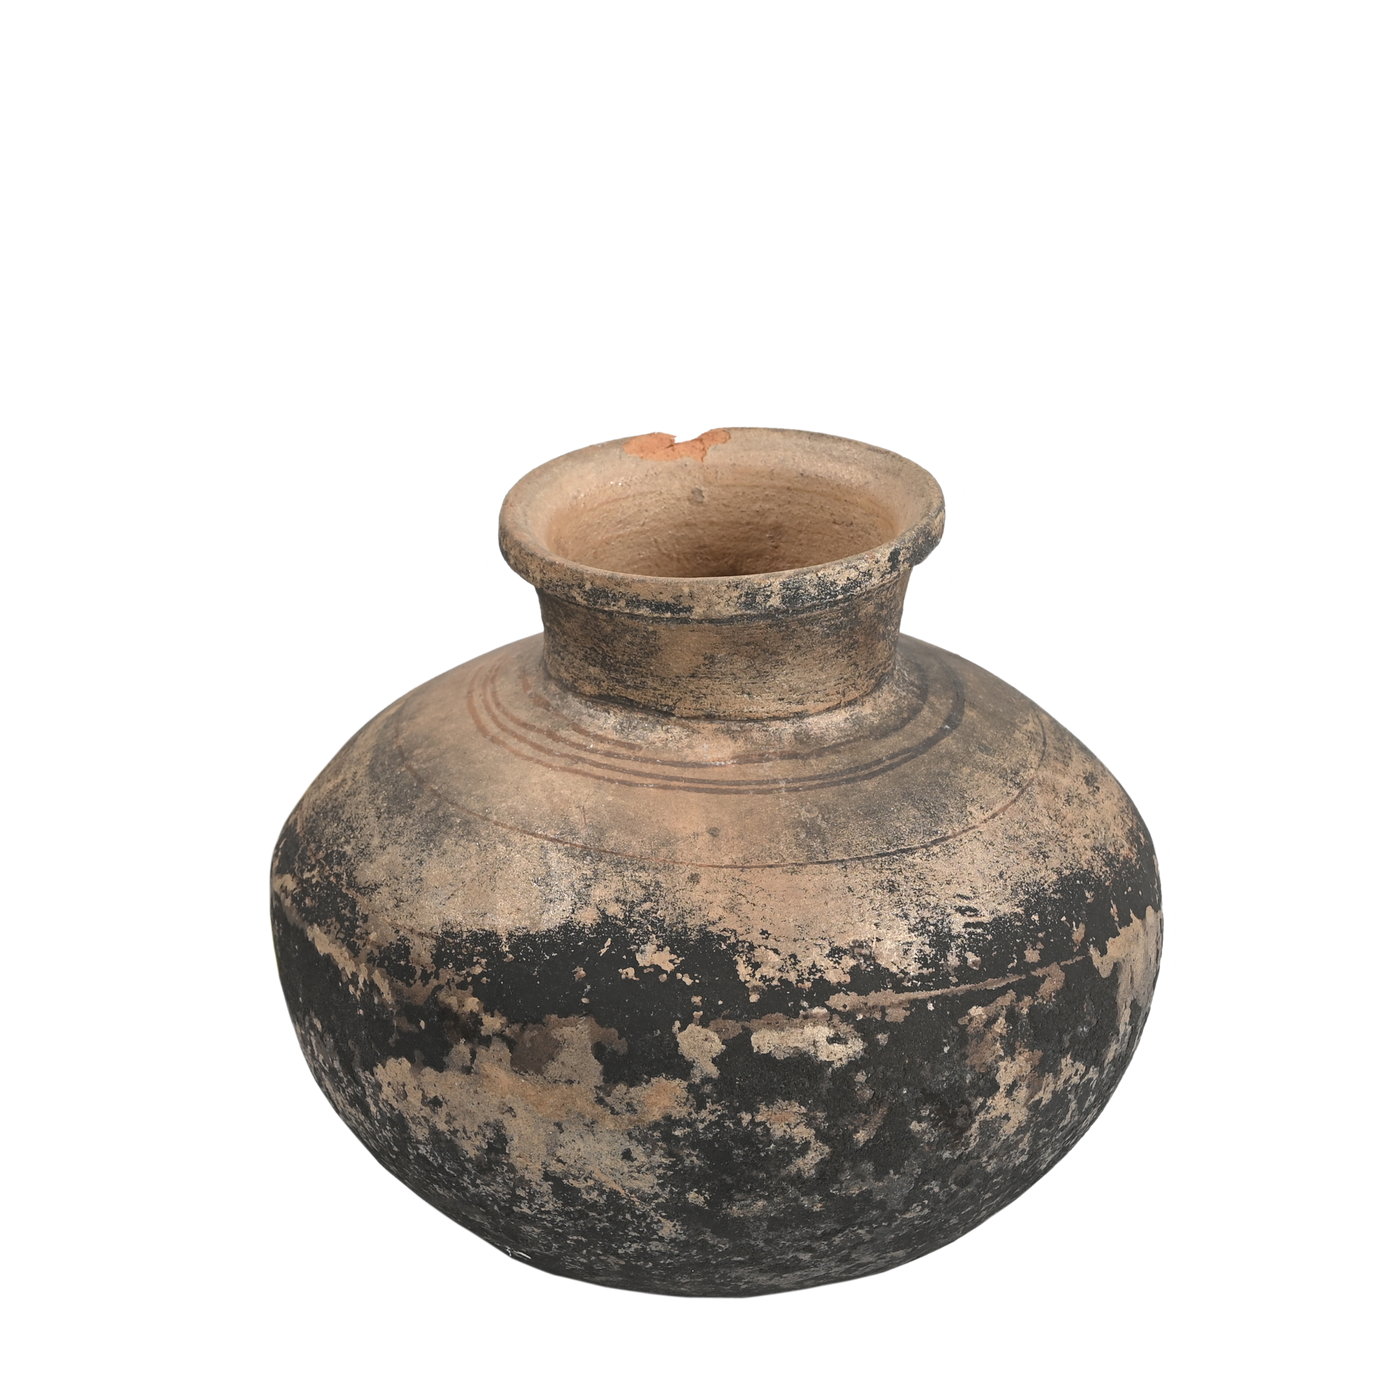 Gaon - Poterie traditionnelle n°61